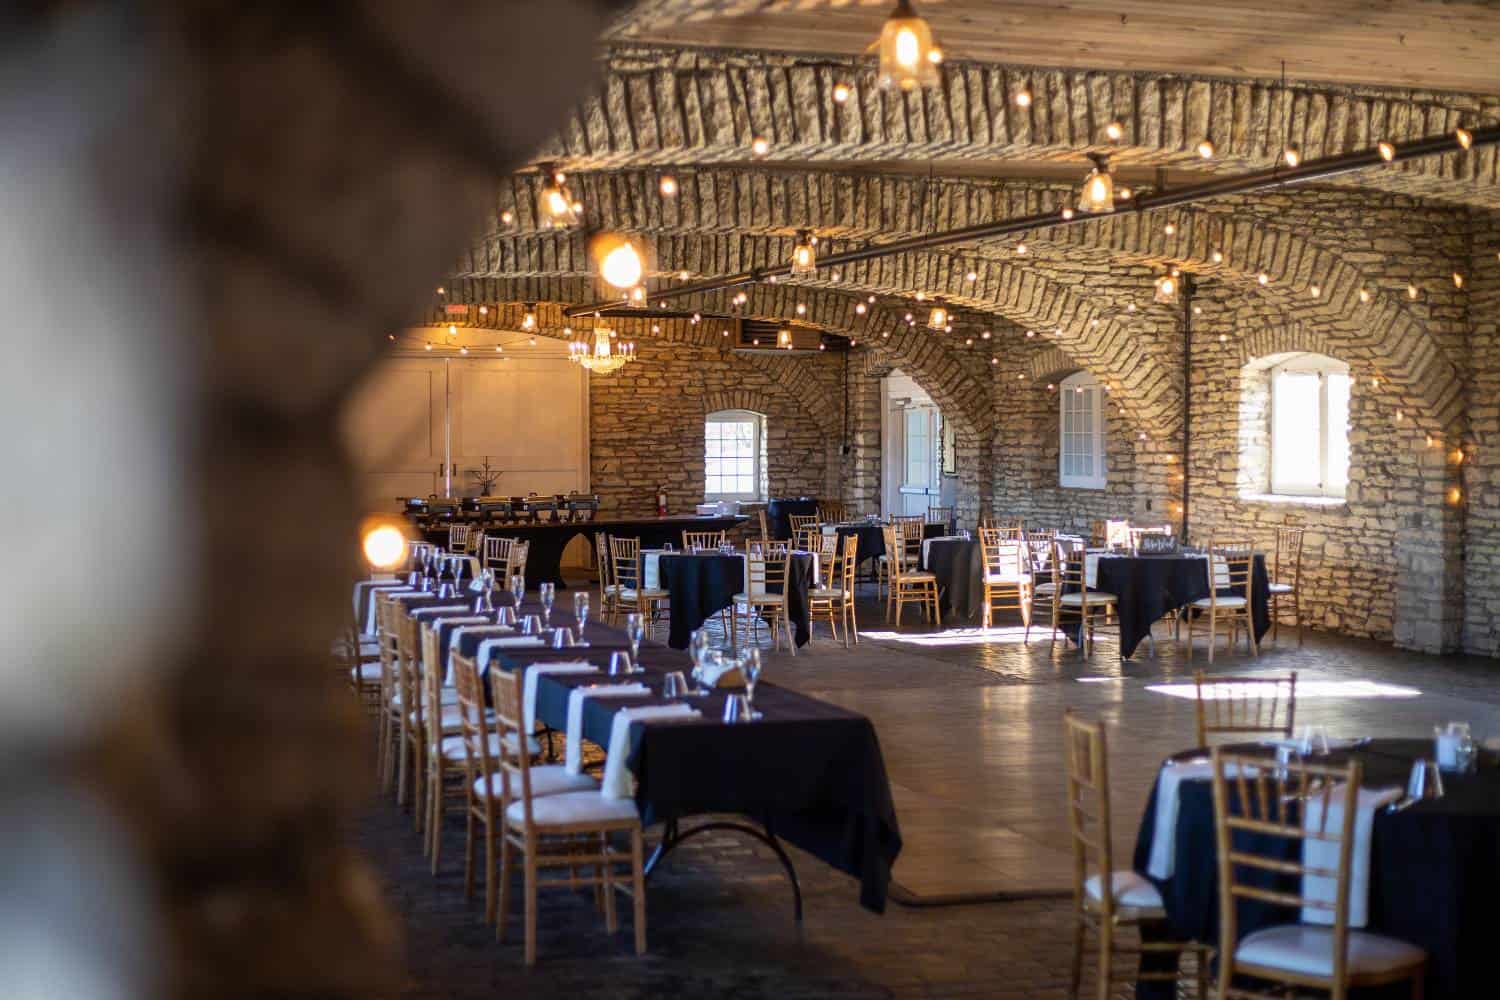 10 unique touches to make your wedding venue stand out 2